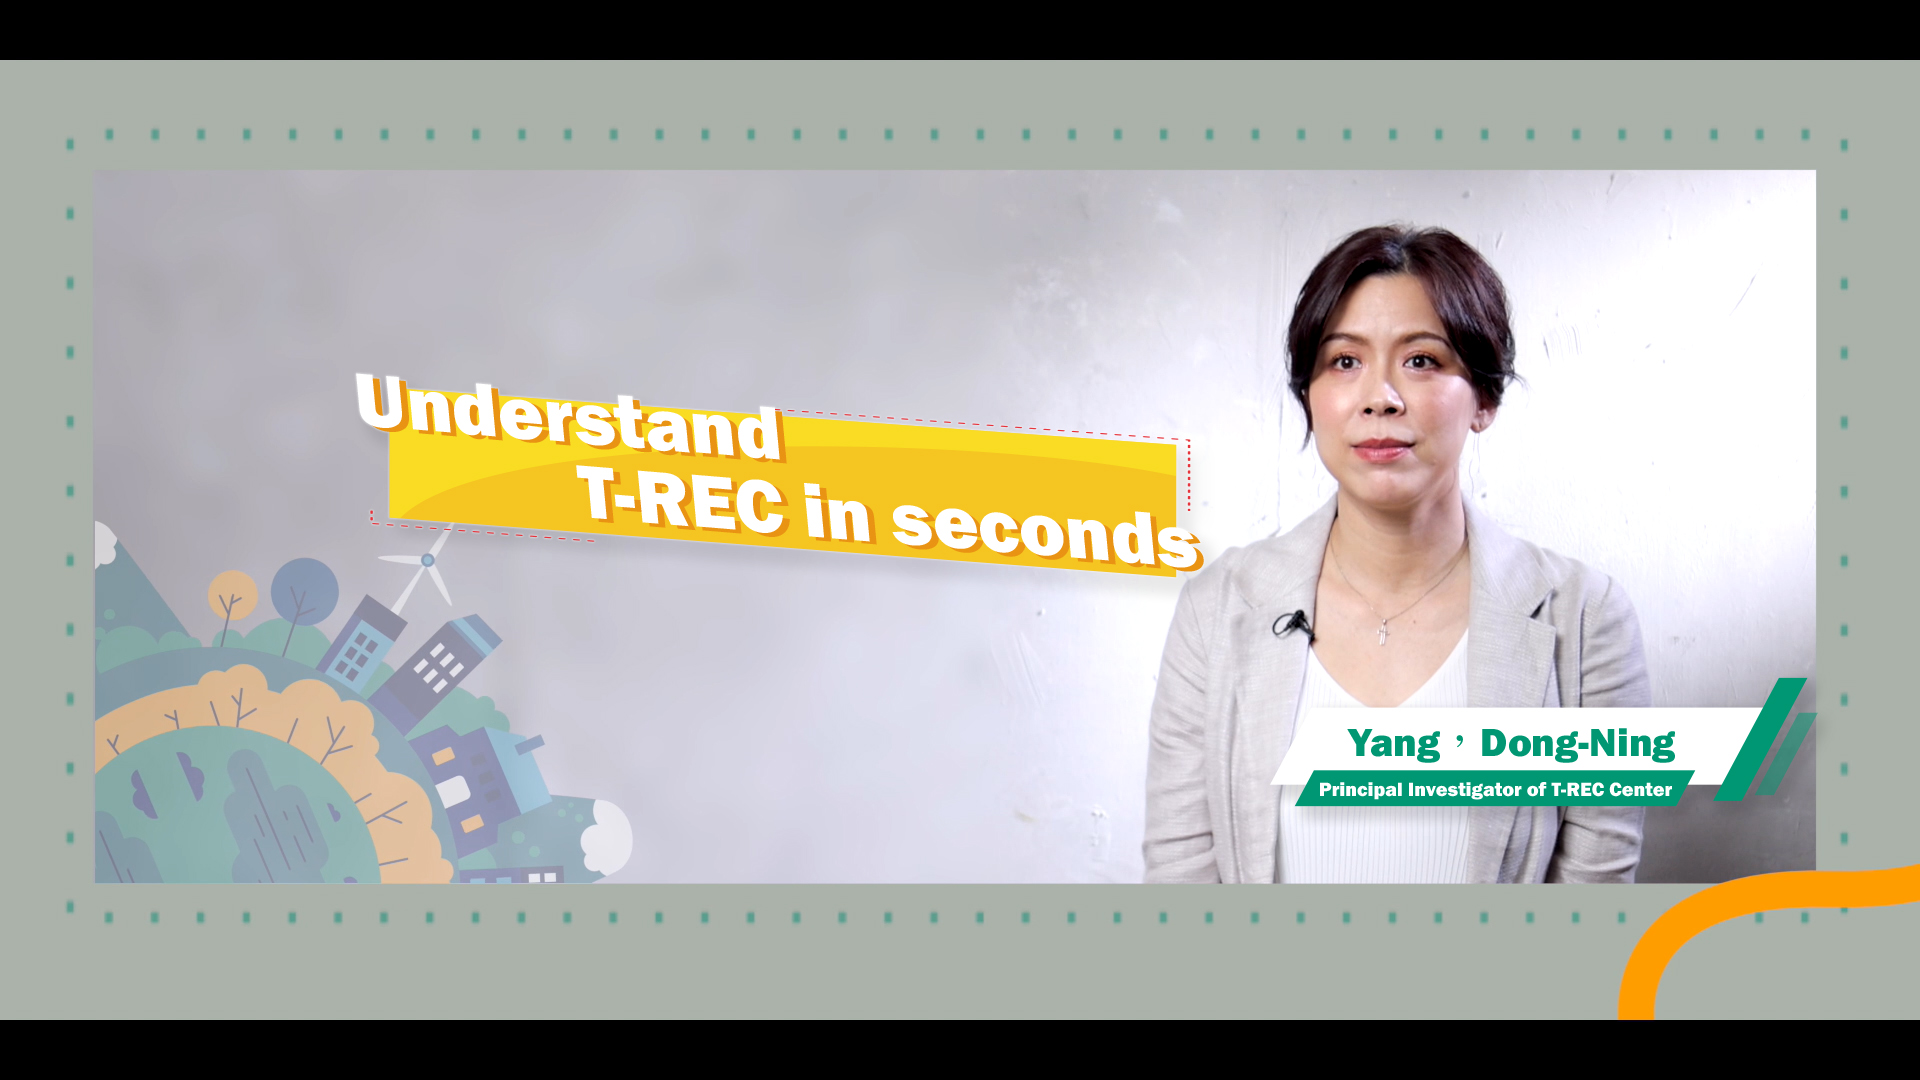 Taiwan Renewable Energy Certificate(T-REC) – Video “Understand T-REC in  seconds” is released in both Mandarin and English version